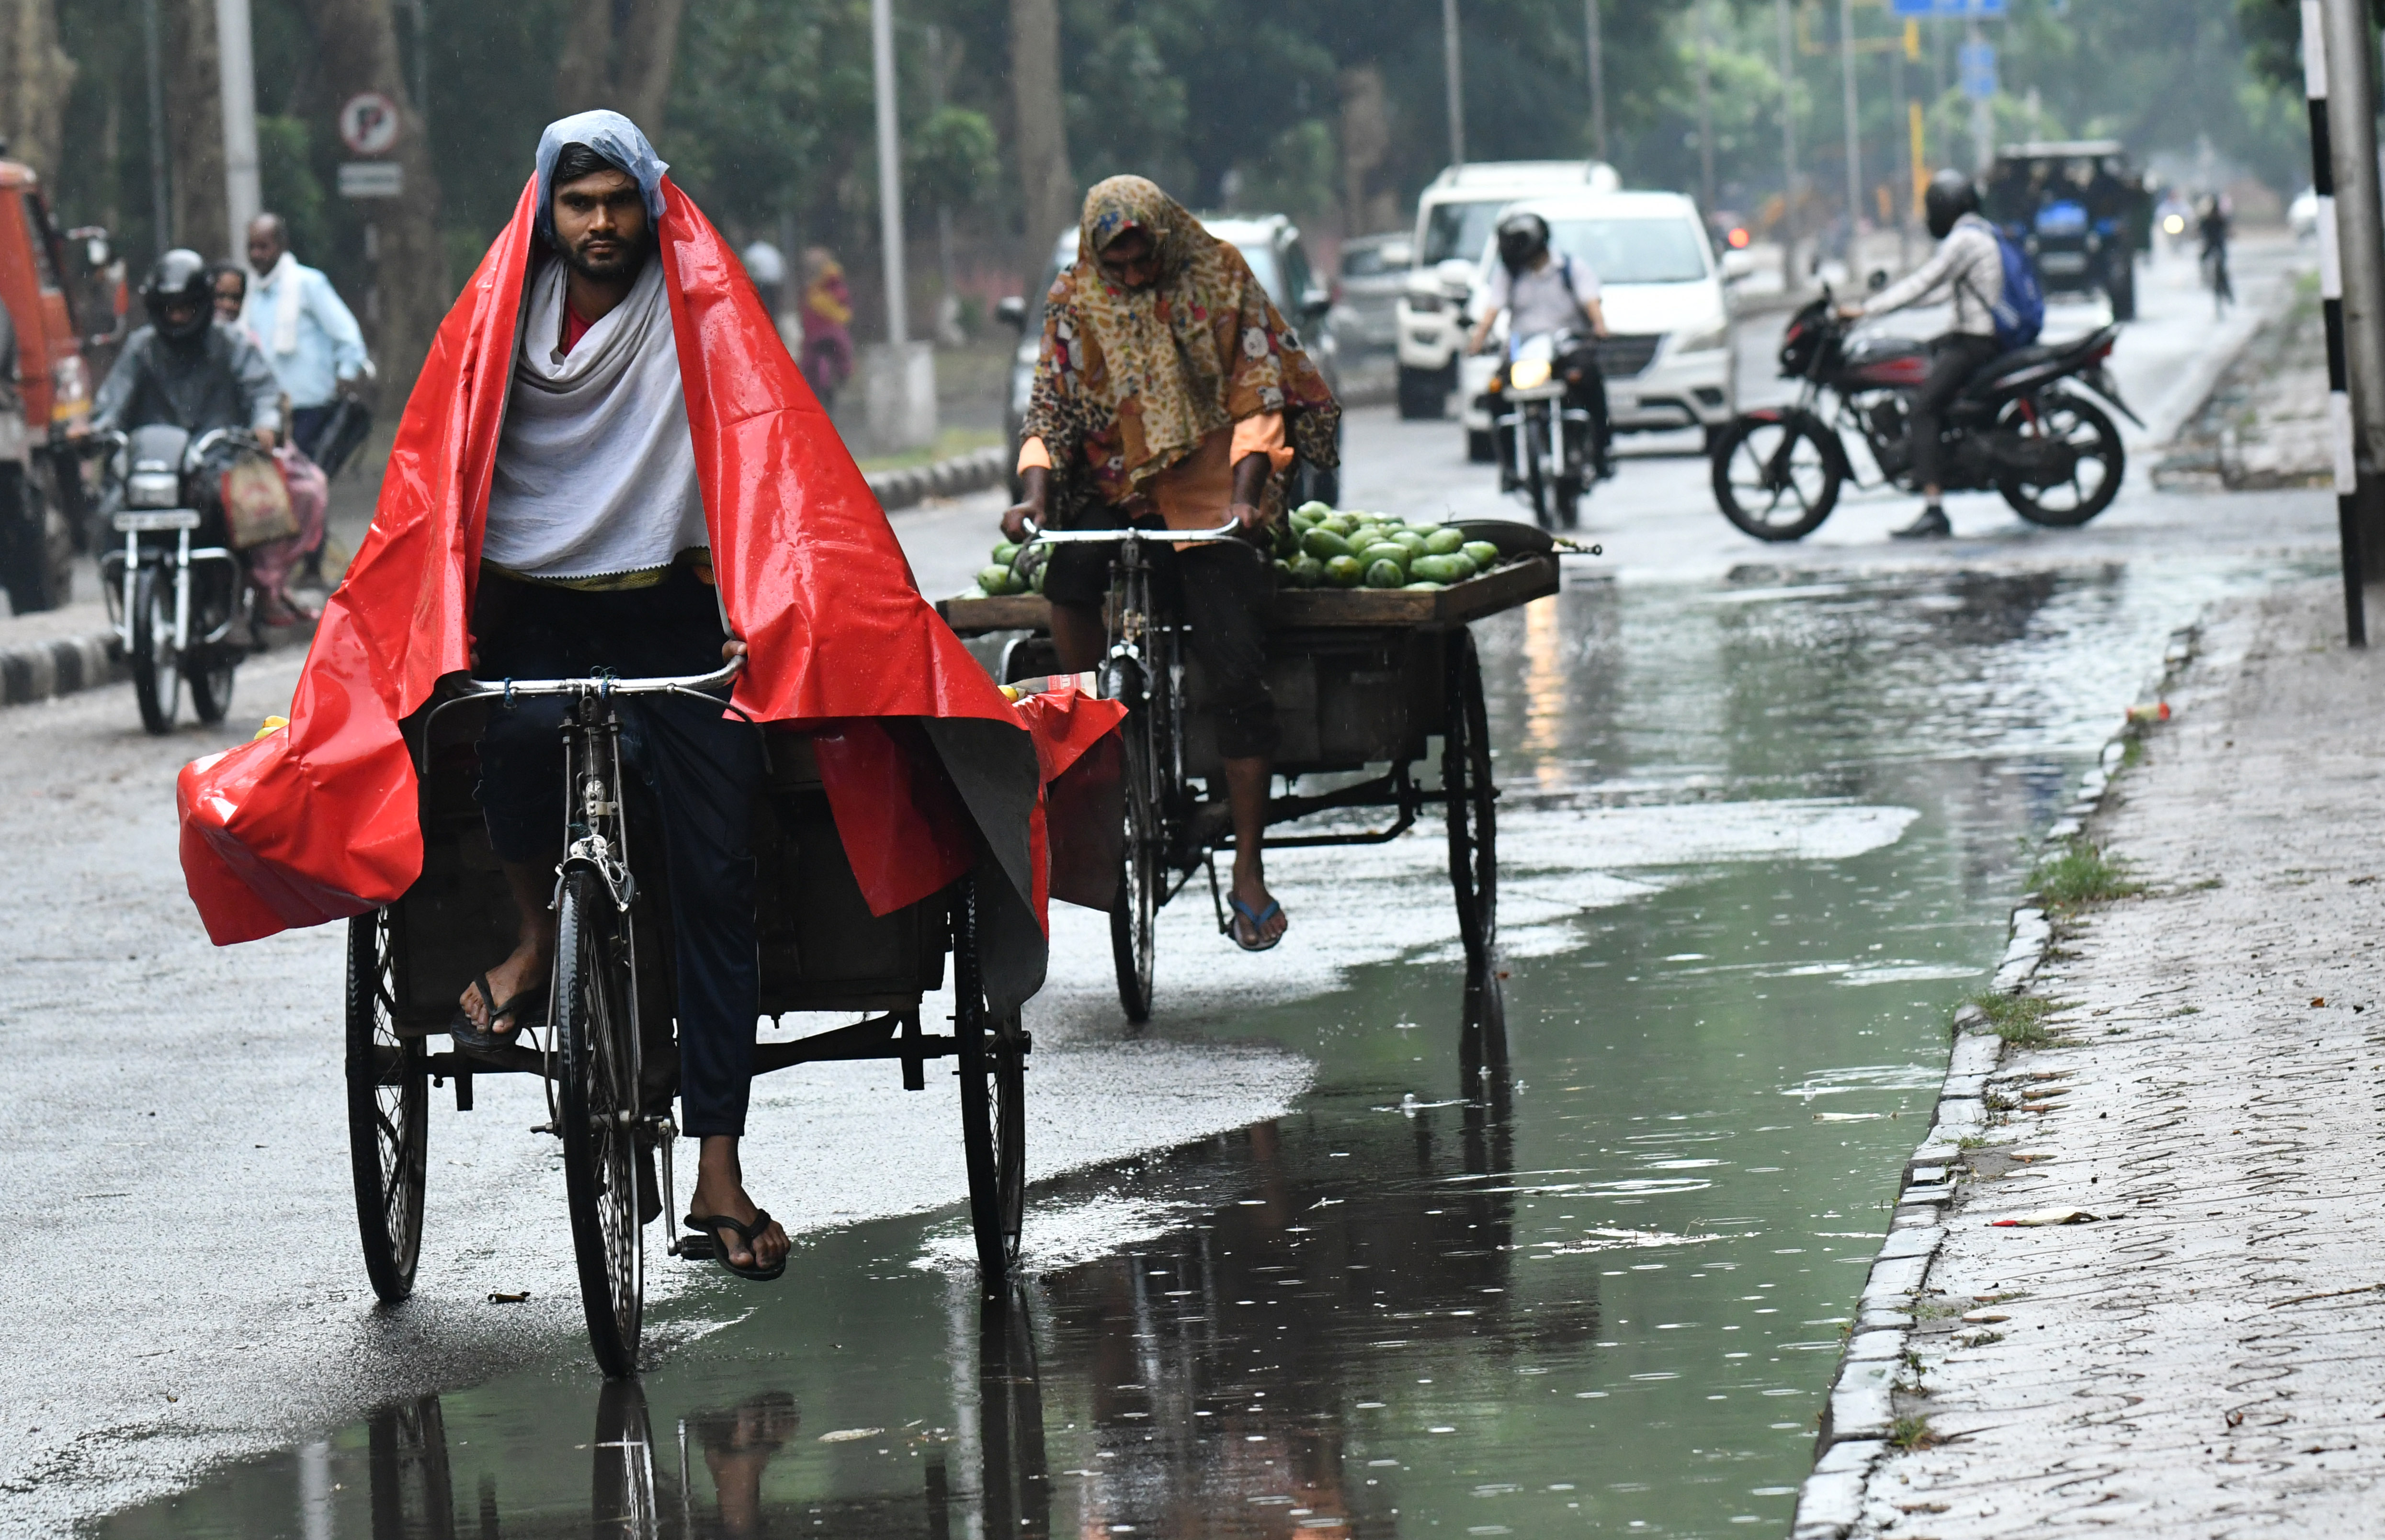 Rain likely for 2 more days in Chandigarh